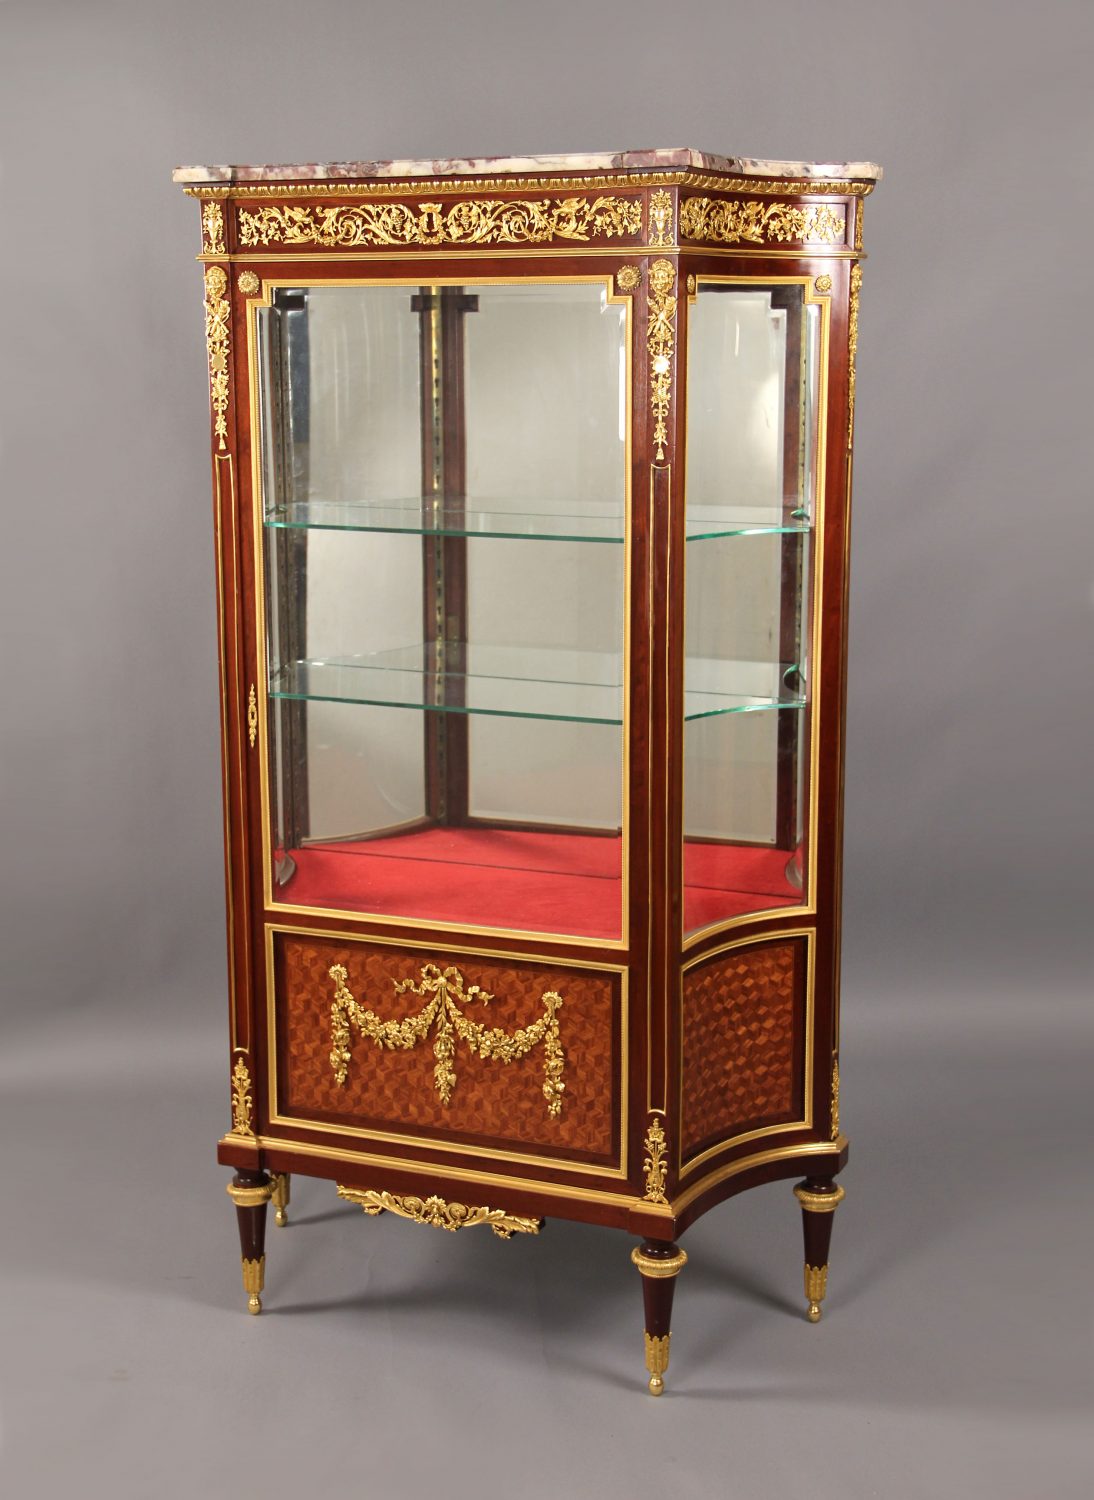 Early 20th Louis XVI Style Mounted Parquetry Vitrine